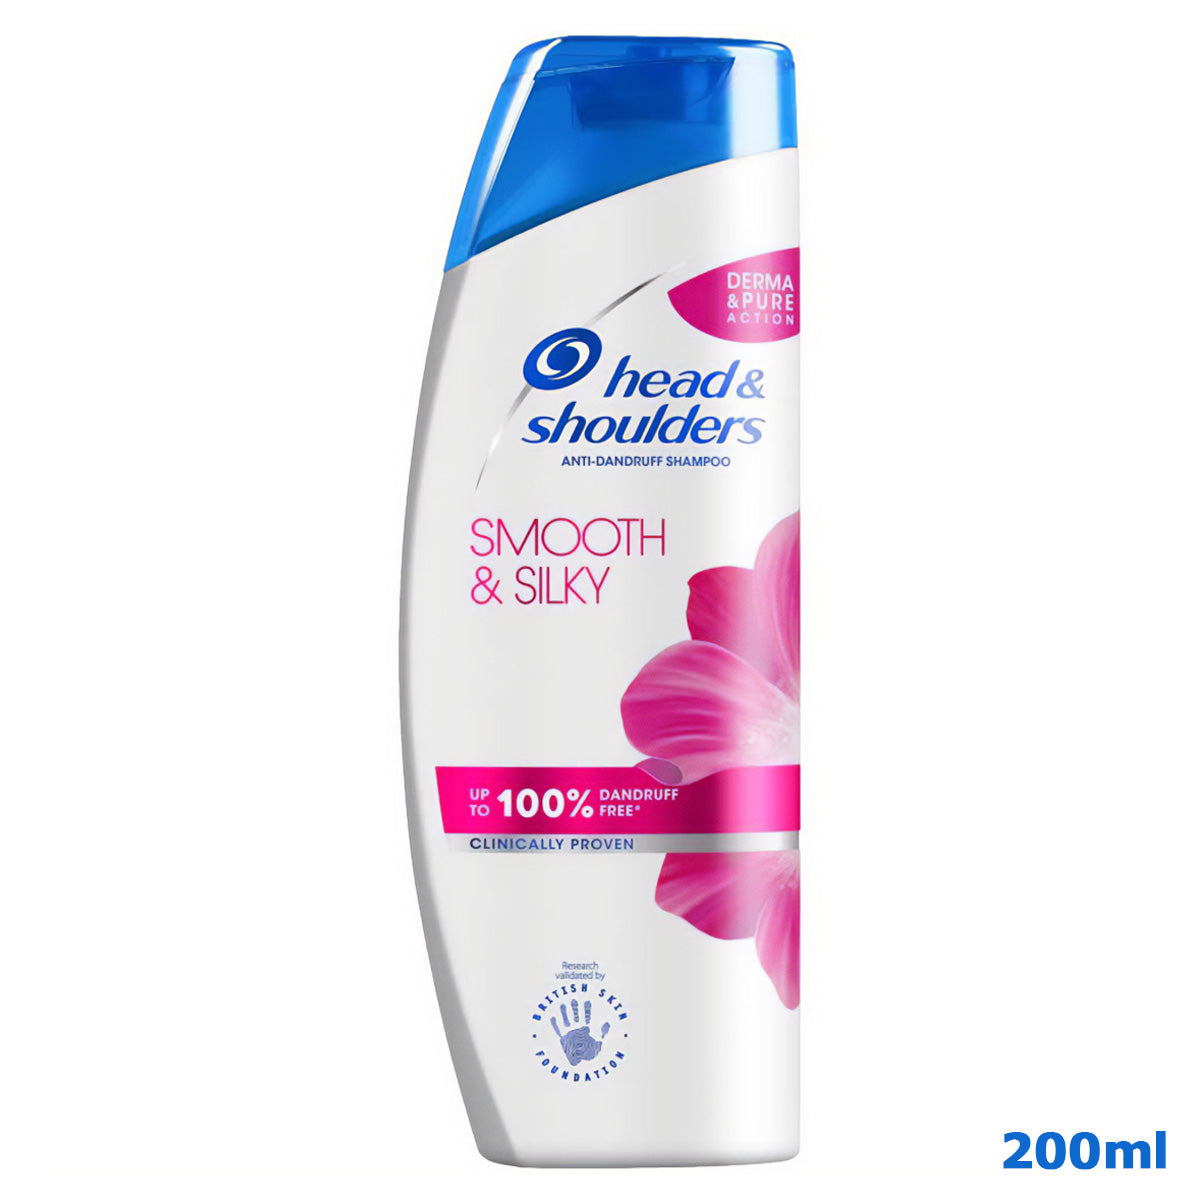 Head & Shoulders - Smooth & Silky Shampoo - 200ml - Continental Food Store